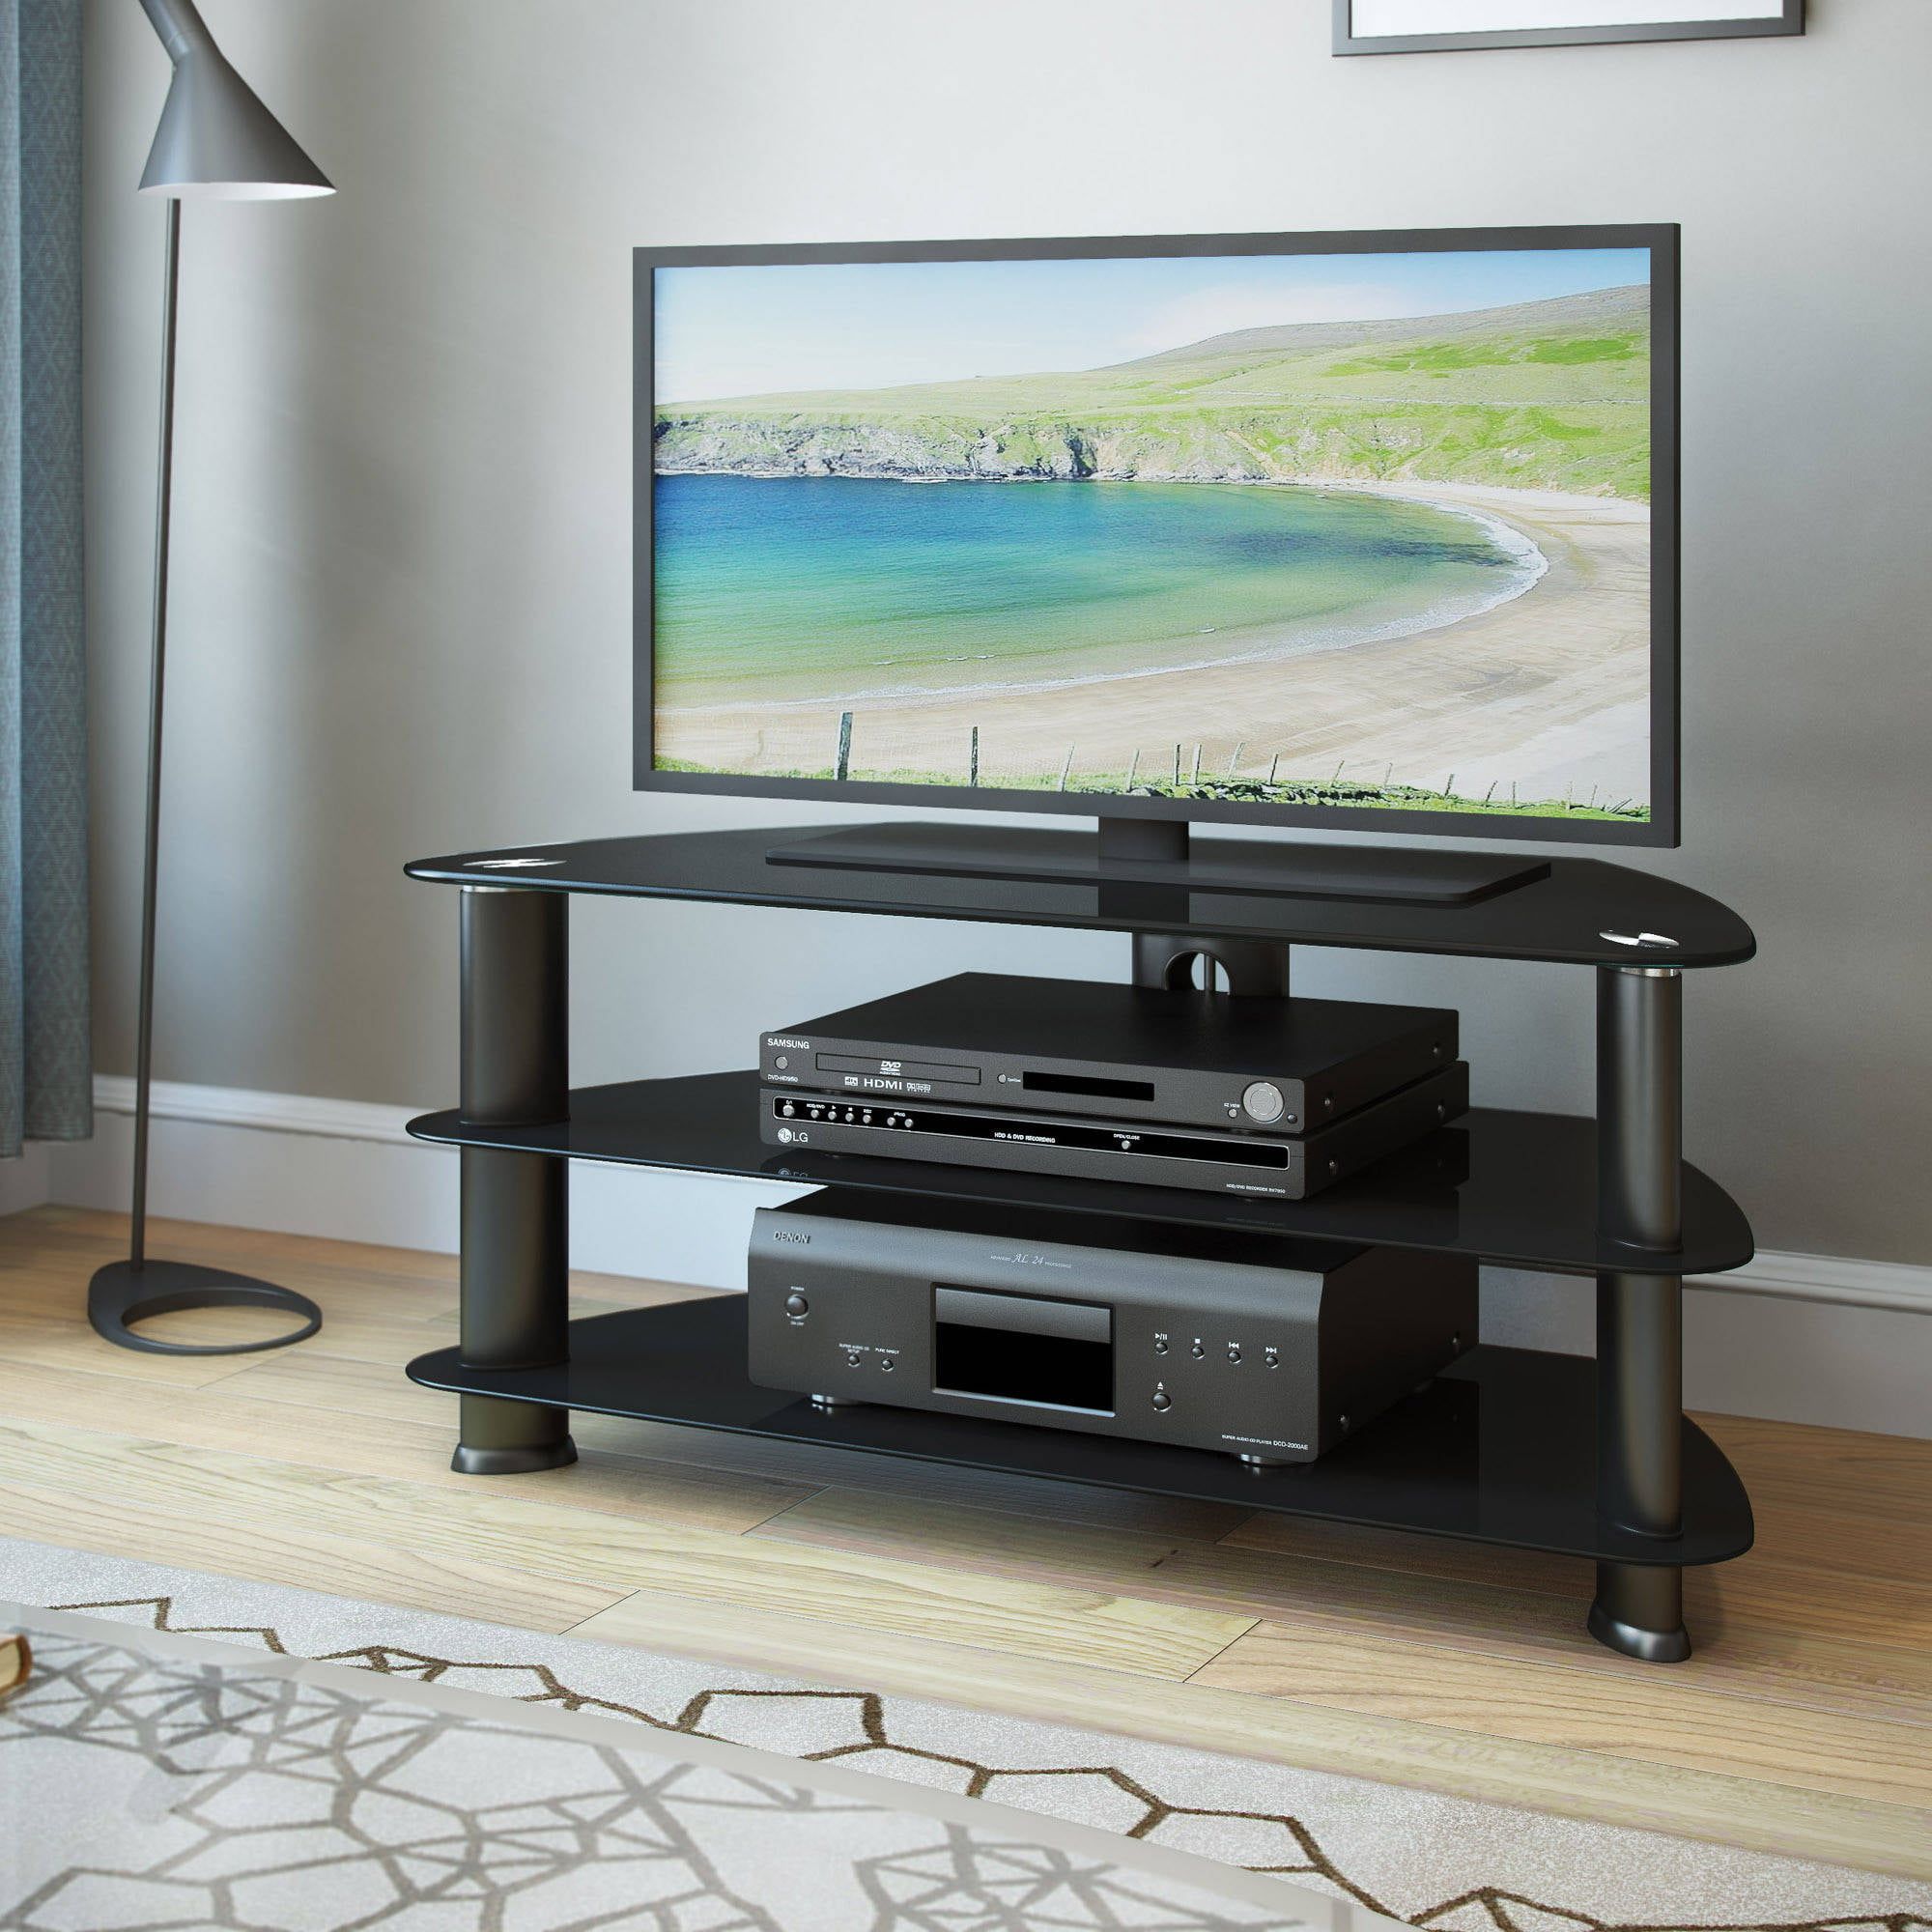 Laguna Satin Black Corner Tv Stand For Tvs Up To 50" – Walmart Within Black Marble Tv Stands (Gallery 17 of 20)